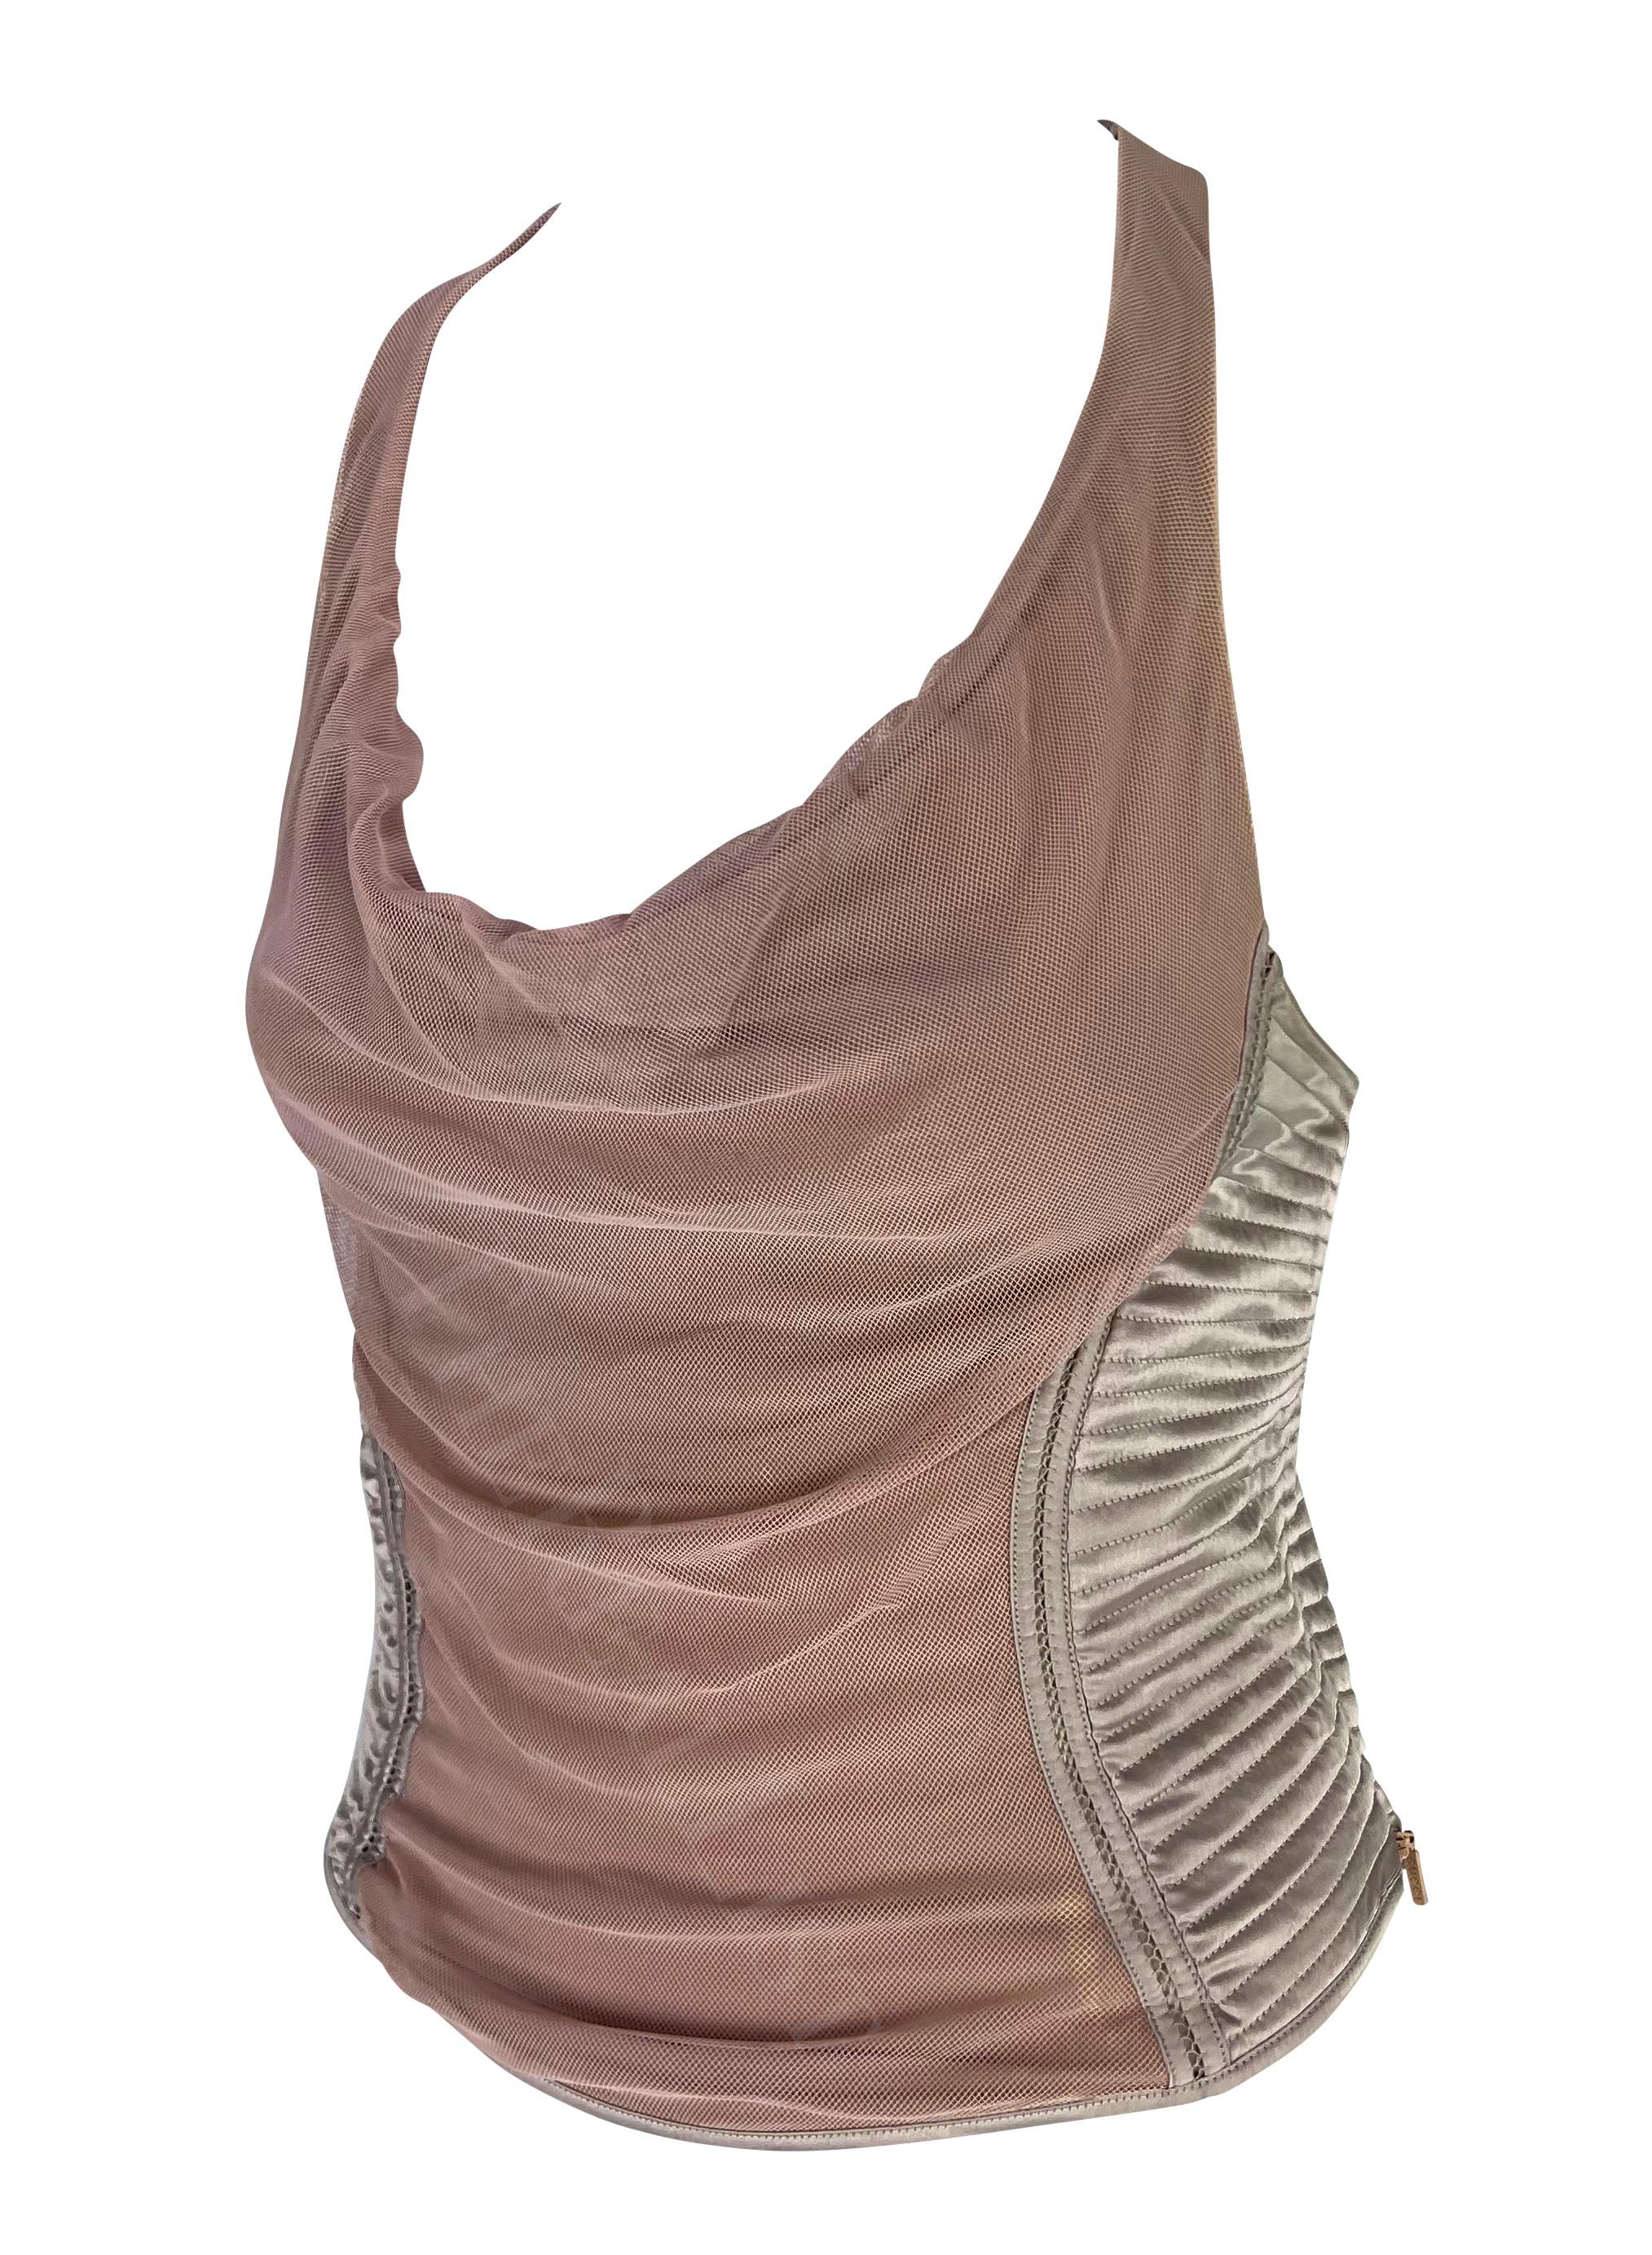 Presenting a blush Gucci racerback tank top, designed by Tom Ford. From the Fall/Winter 2003 collection, this cowl neck sleeveless top features a tulle mesh panel at the front and down the back. The top is made complete with a quilted silvery satin